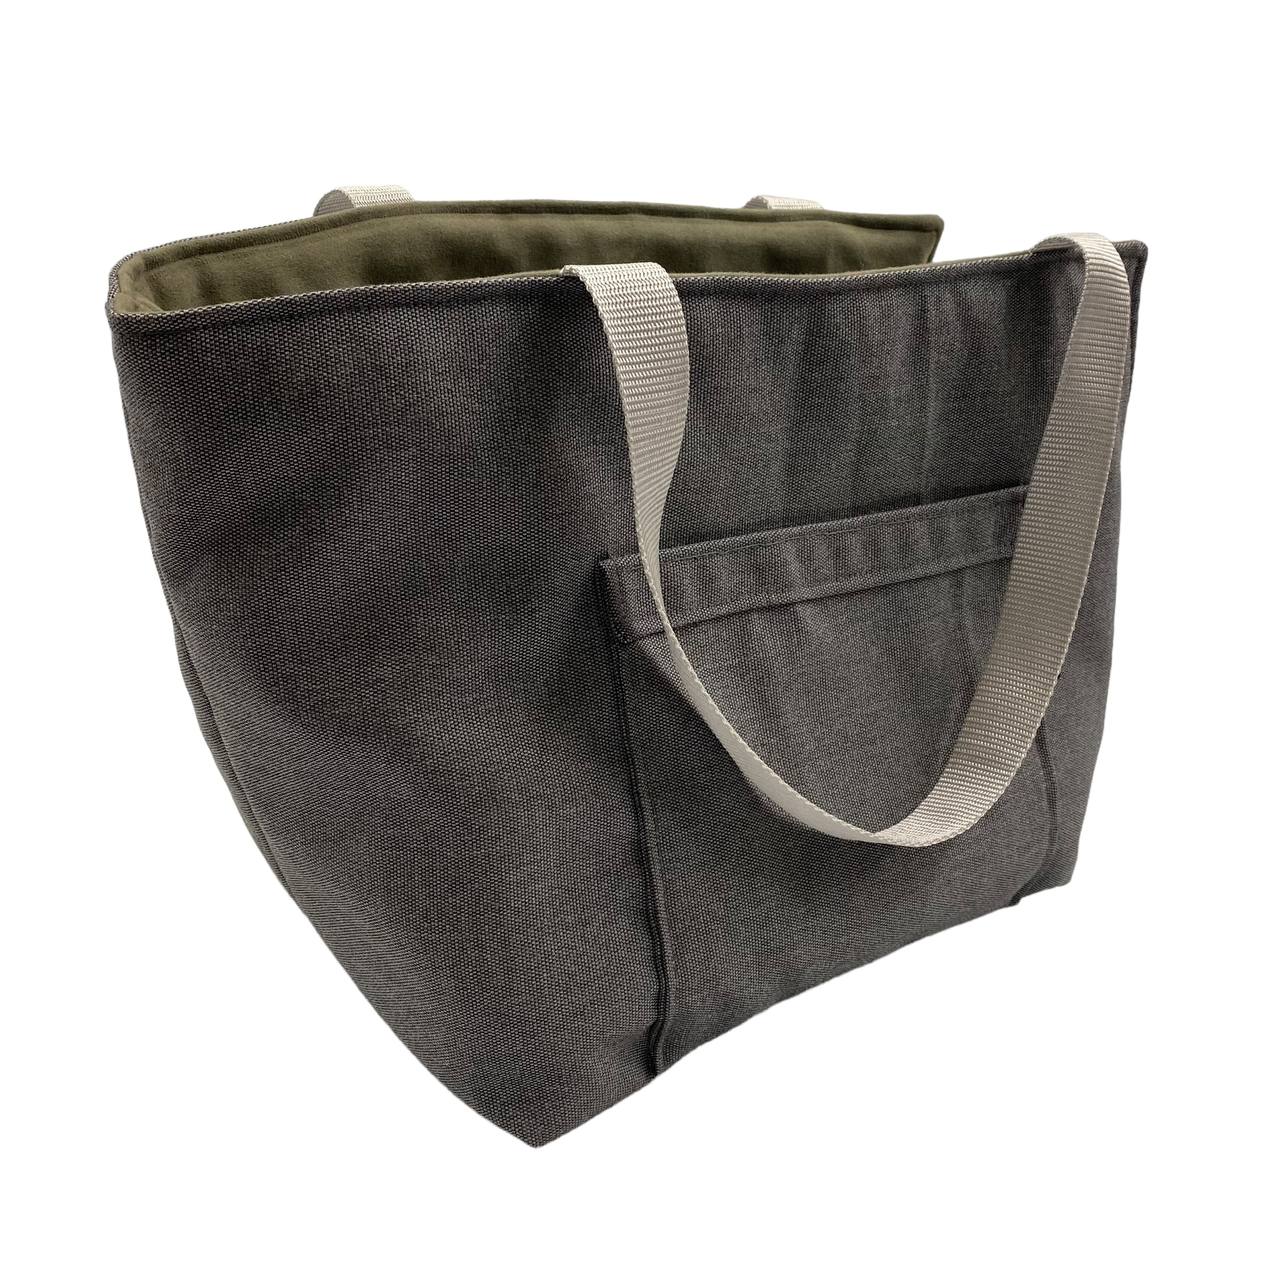 Hawk Grey and Olive Dog Carrier